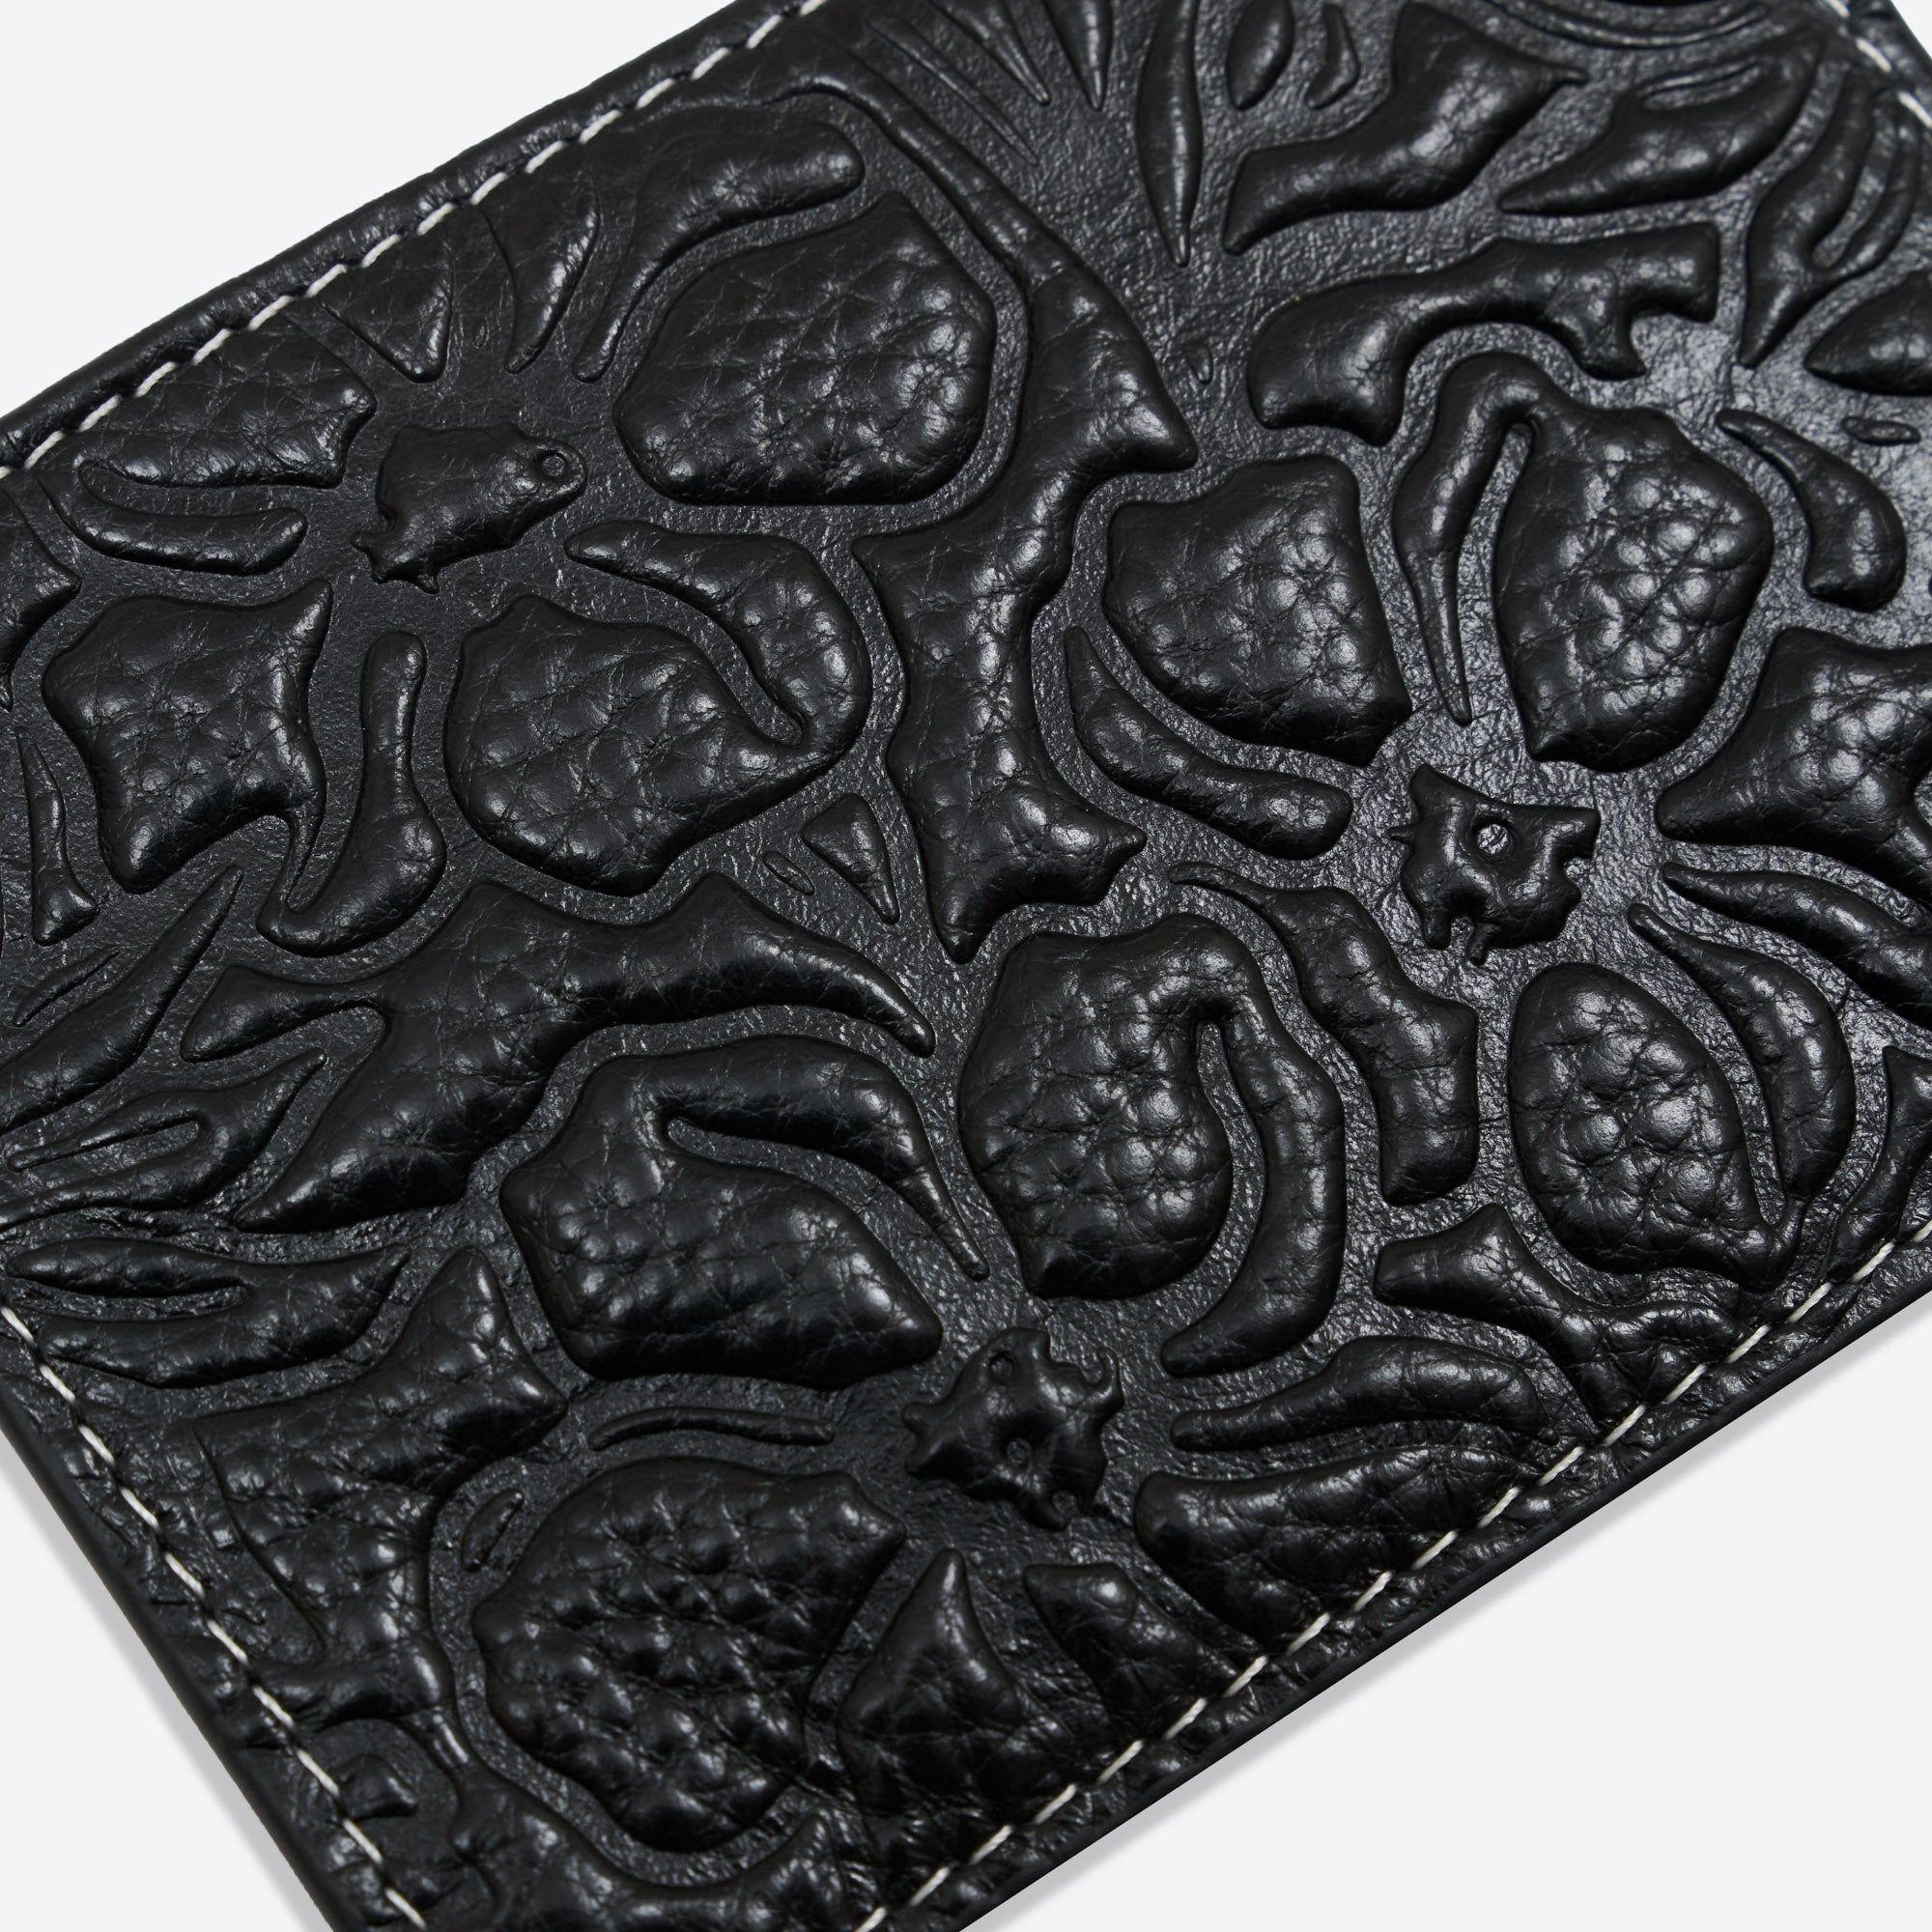 Alfred's Apartment - Native Card Holder - Black